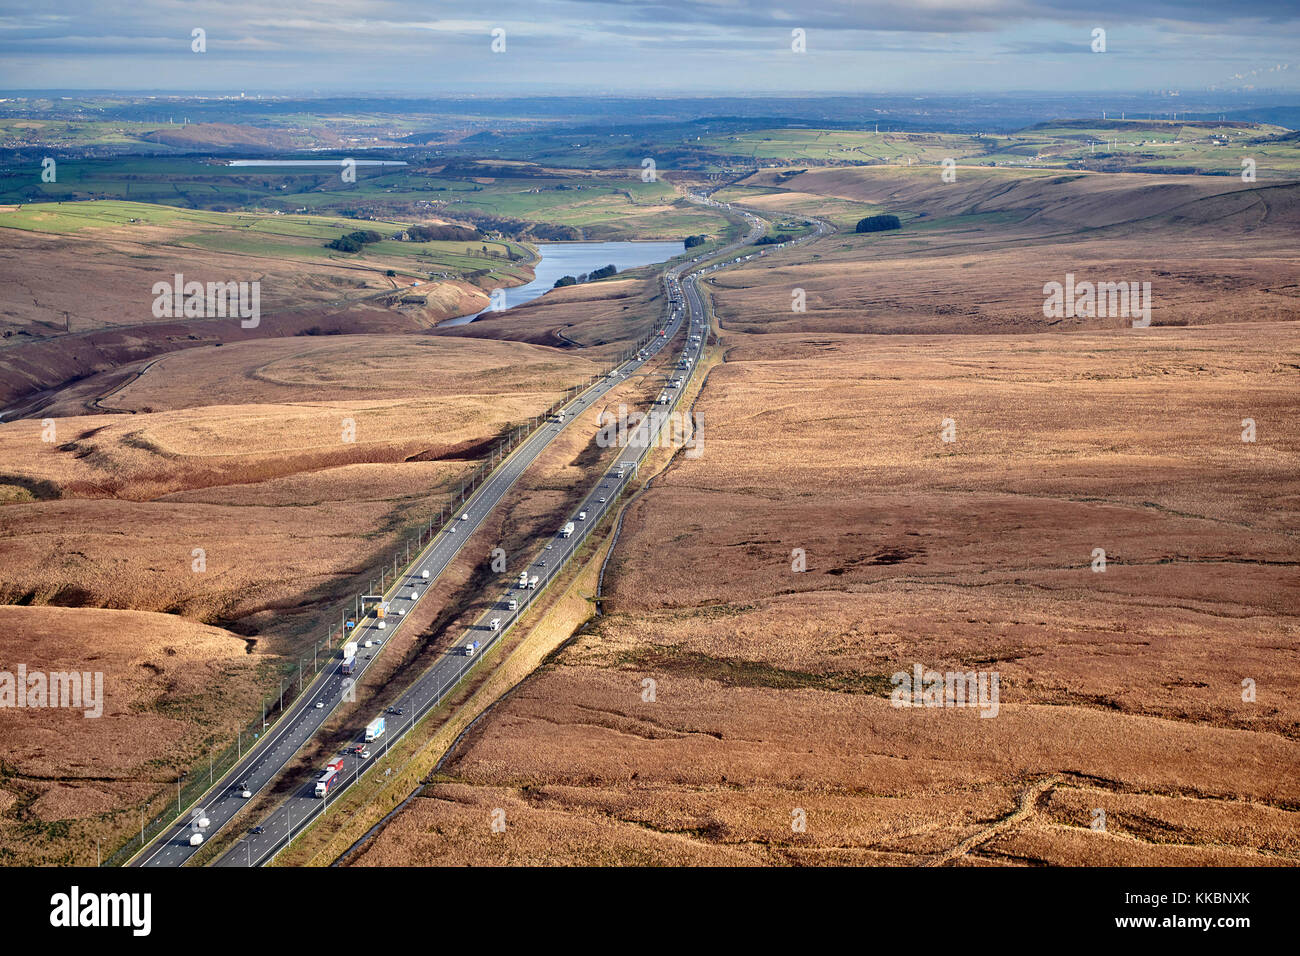 An aerial view of the M62 Motorway at its highest point in the Pennine hills, West Yorkshire, Northern England, UK Stock Photo